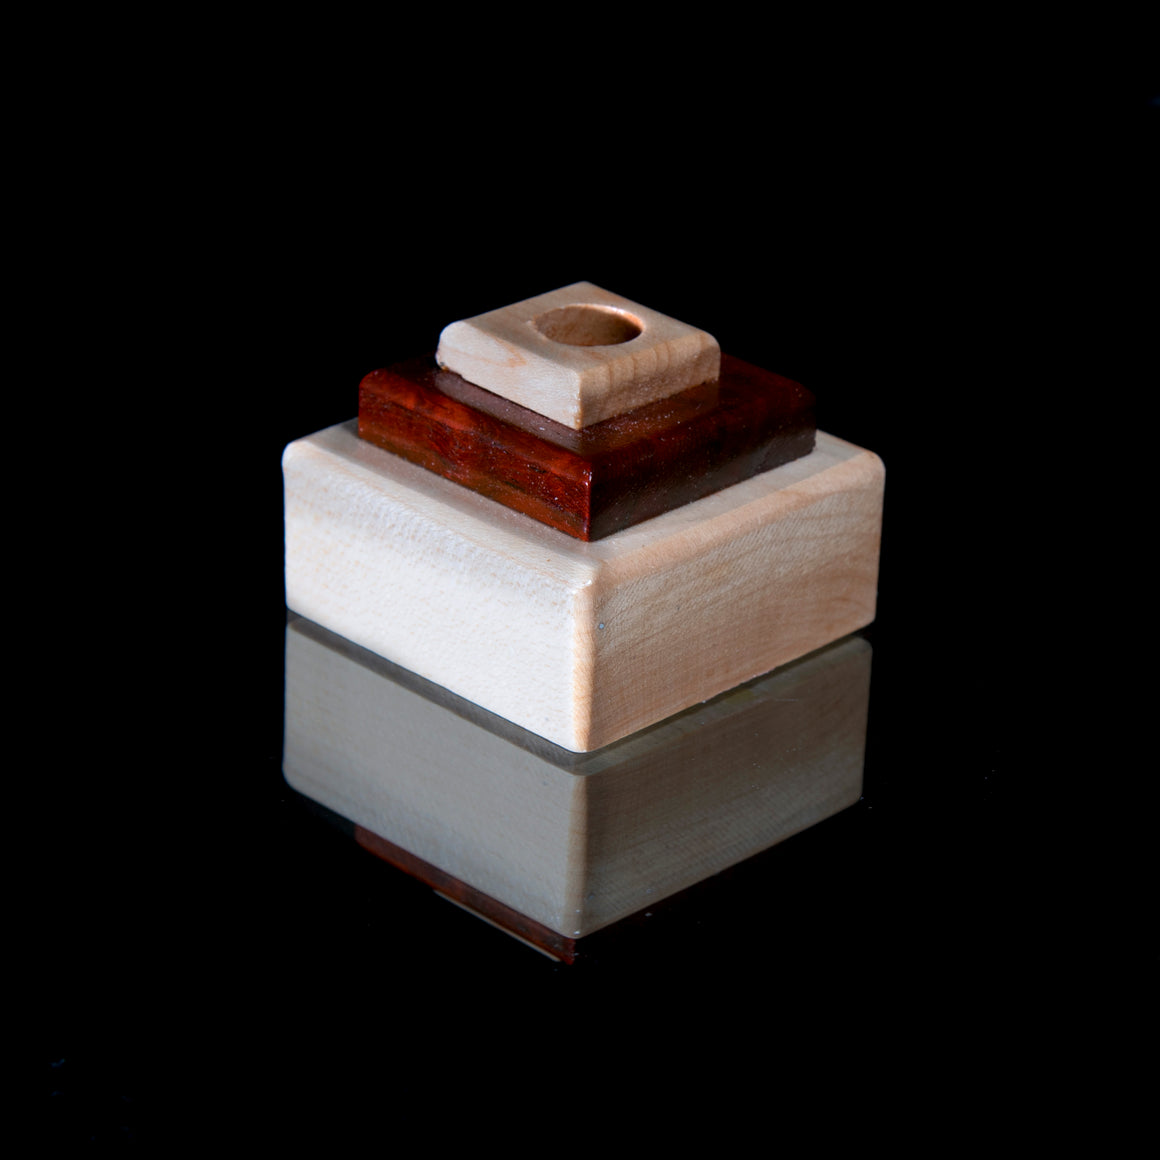 Wooden Single Marble Stands w/ Built-in LED Light